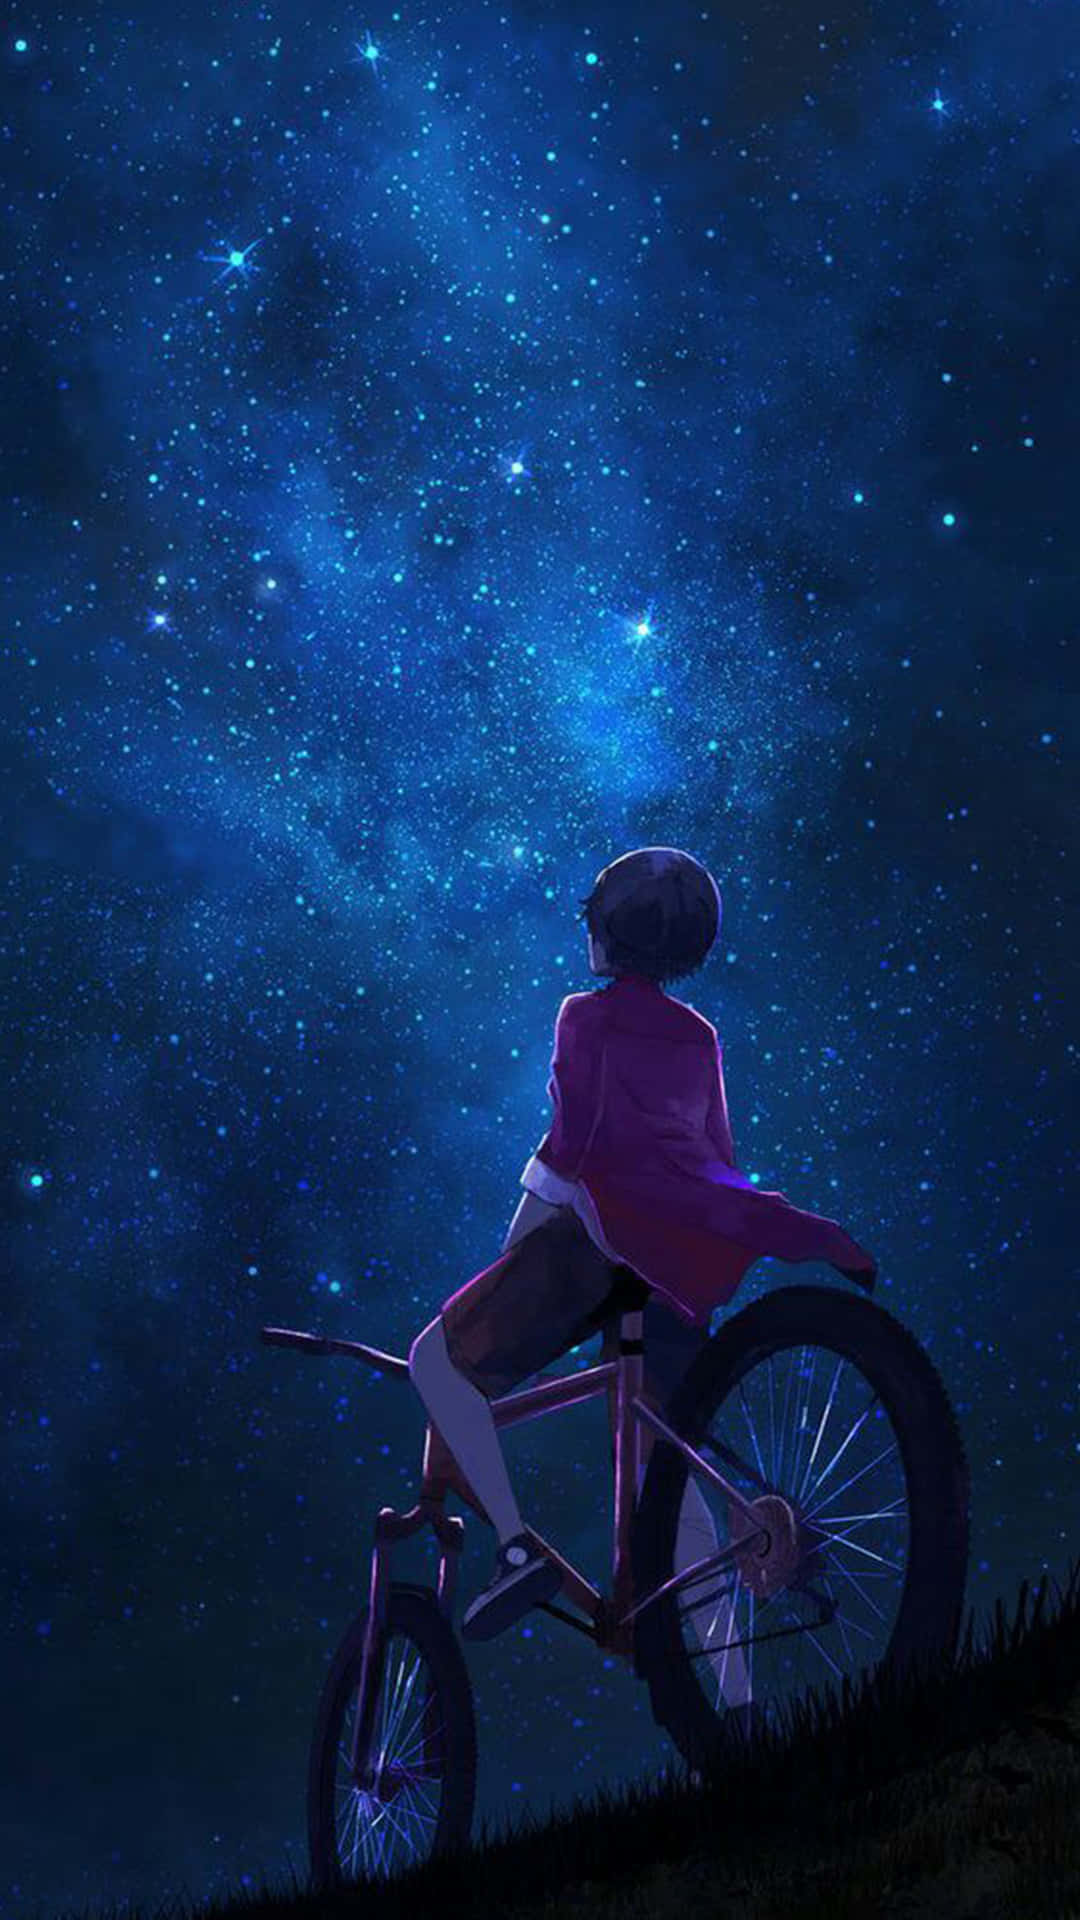 A Girl Is Riding A Bike Under The Stars